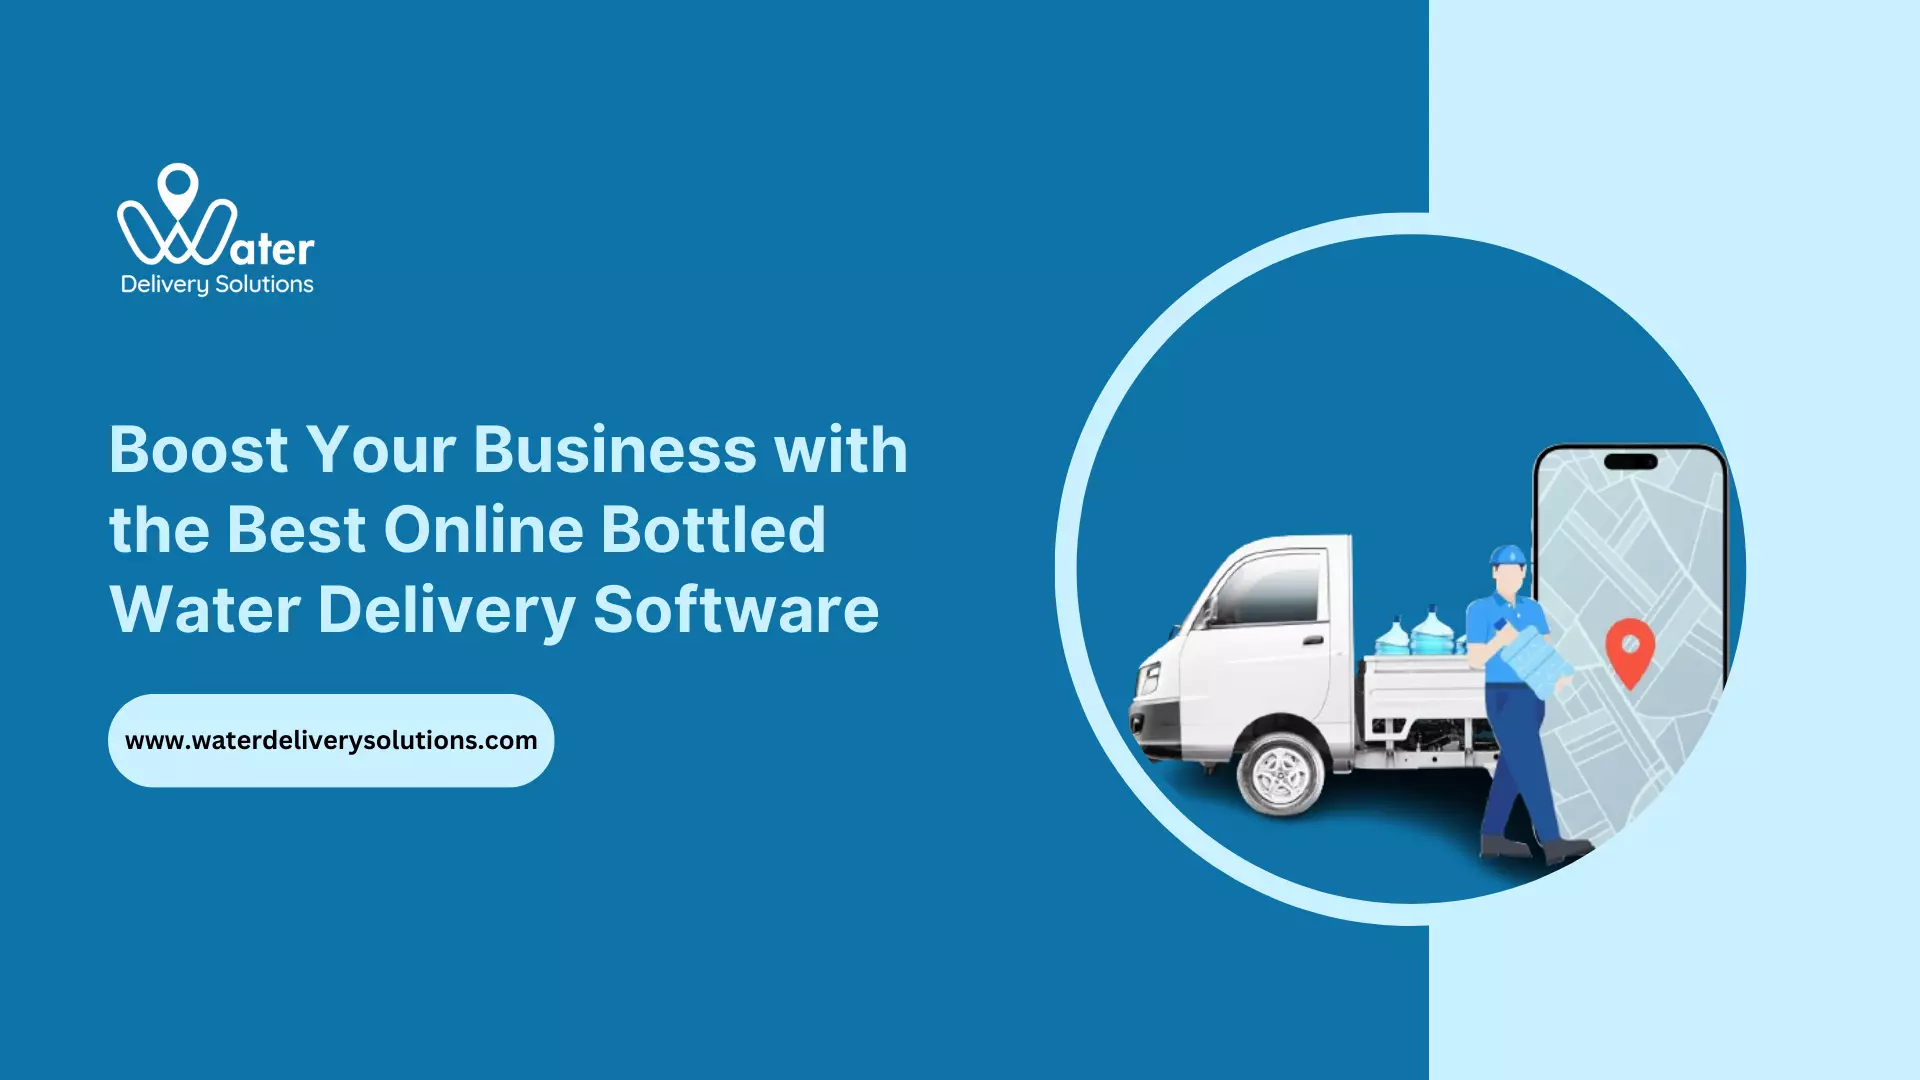 Boost Your Business with the Best Online Bottled Water Delivery Software